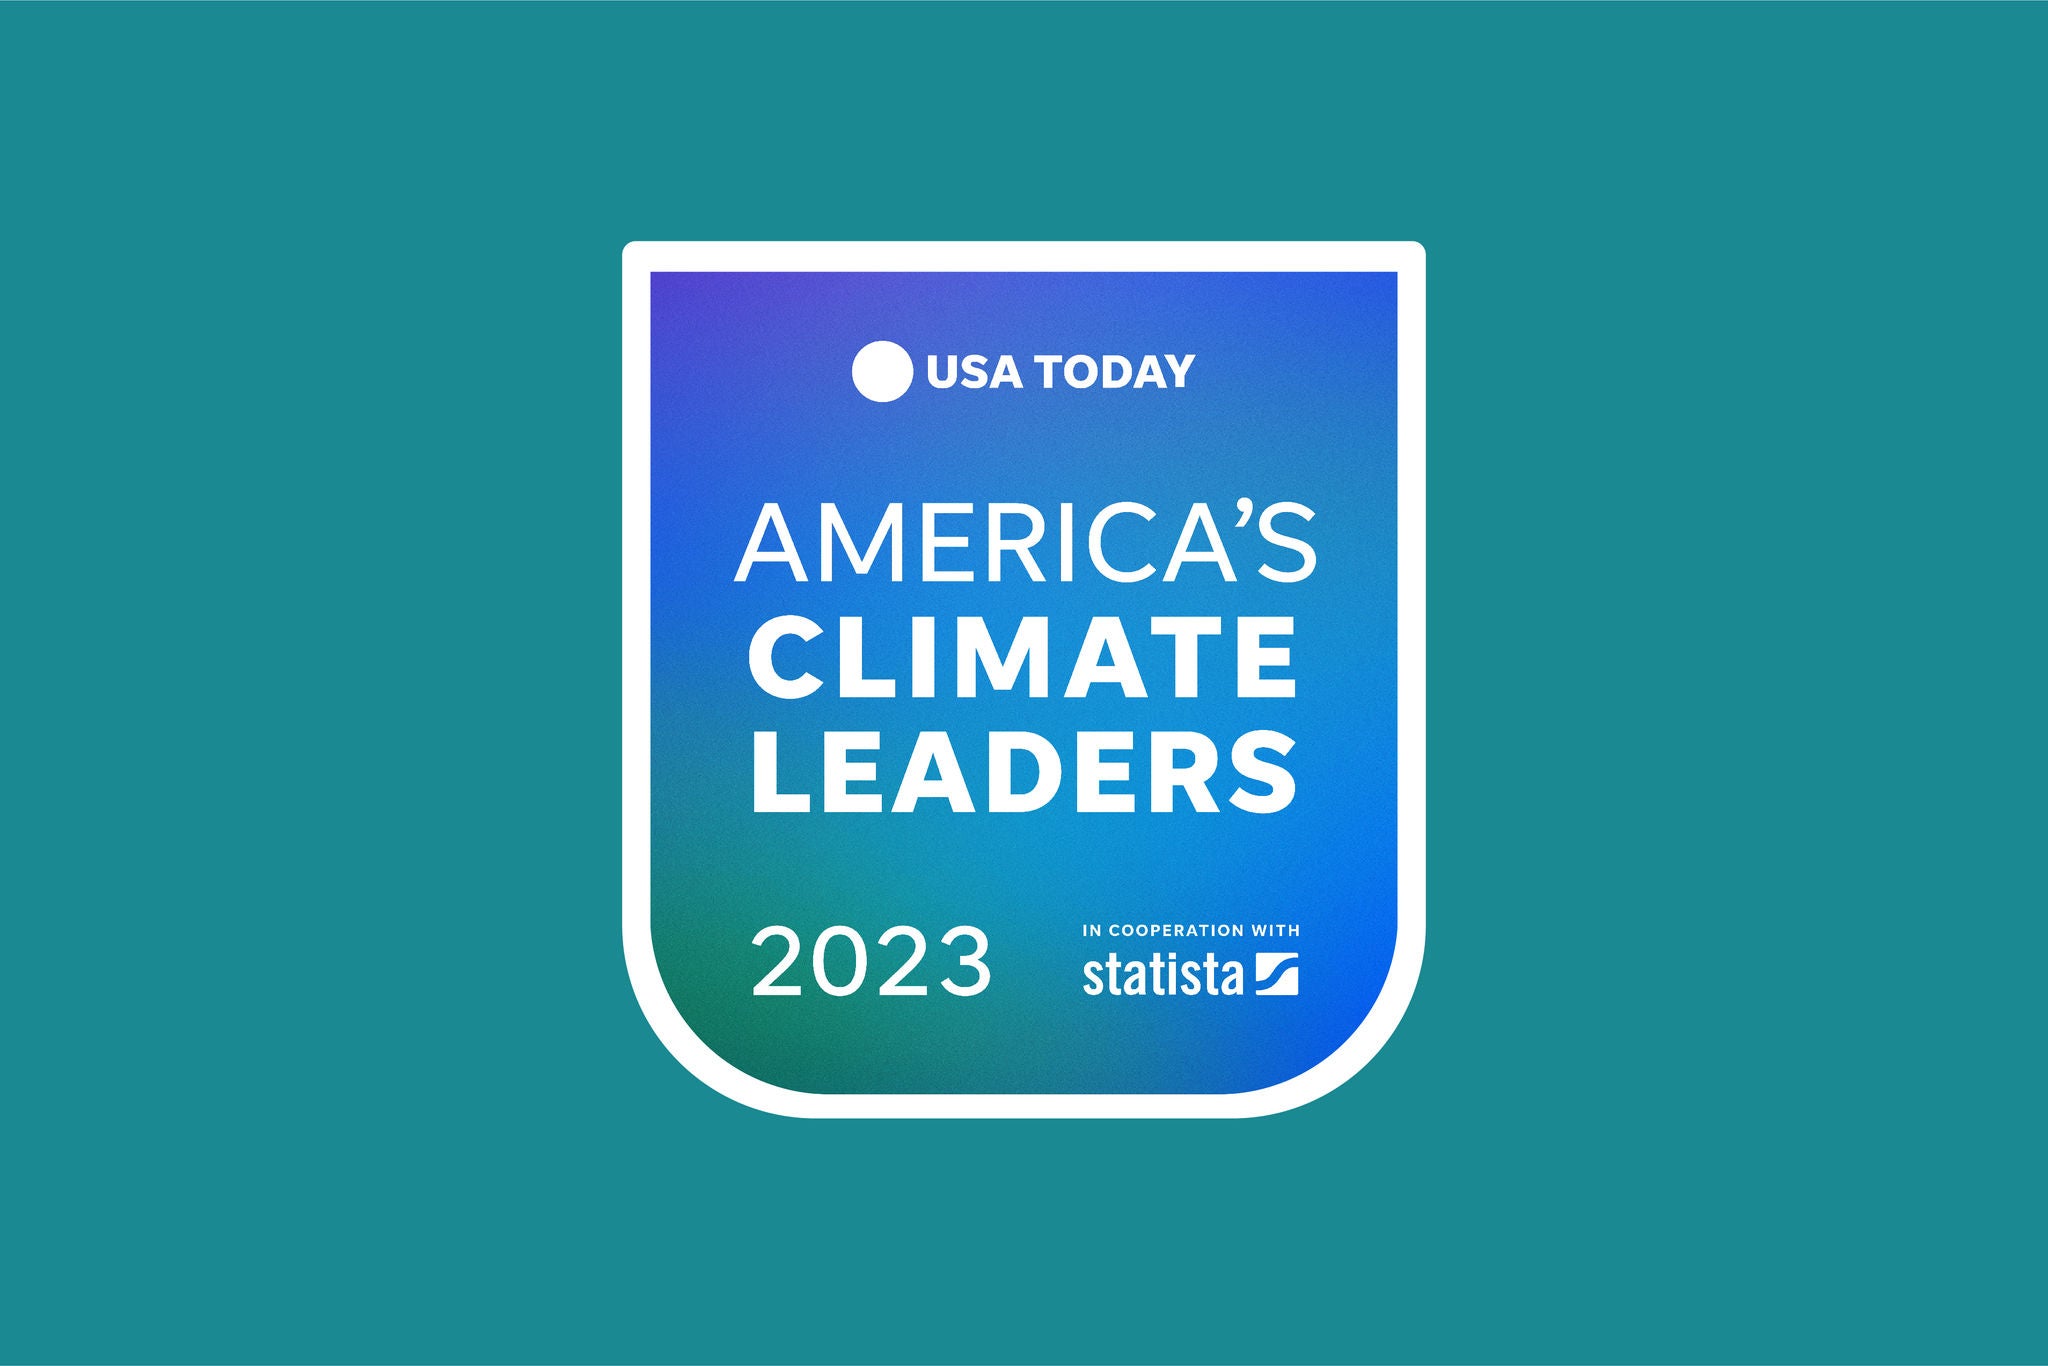 Blue white and green logo that says USA Today America’s Climate Leaders 2023 on dark teal square representing Norfolk Southern’s sustainable rail transport work